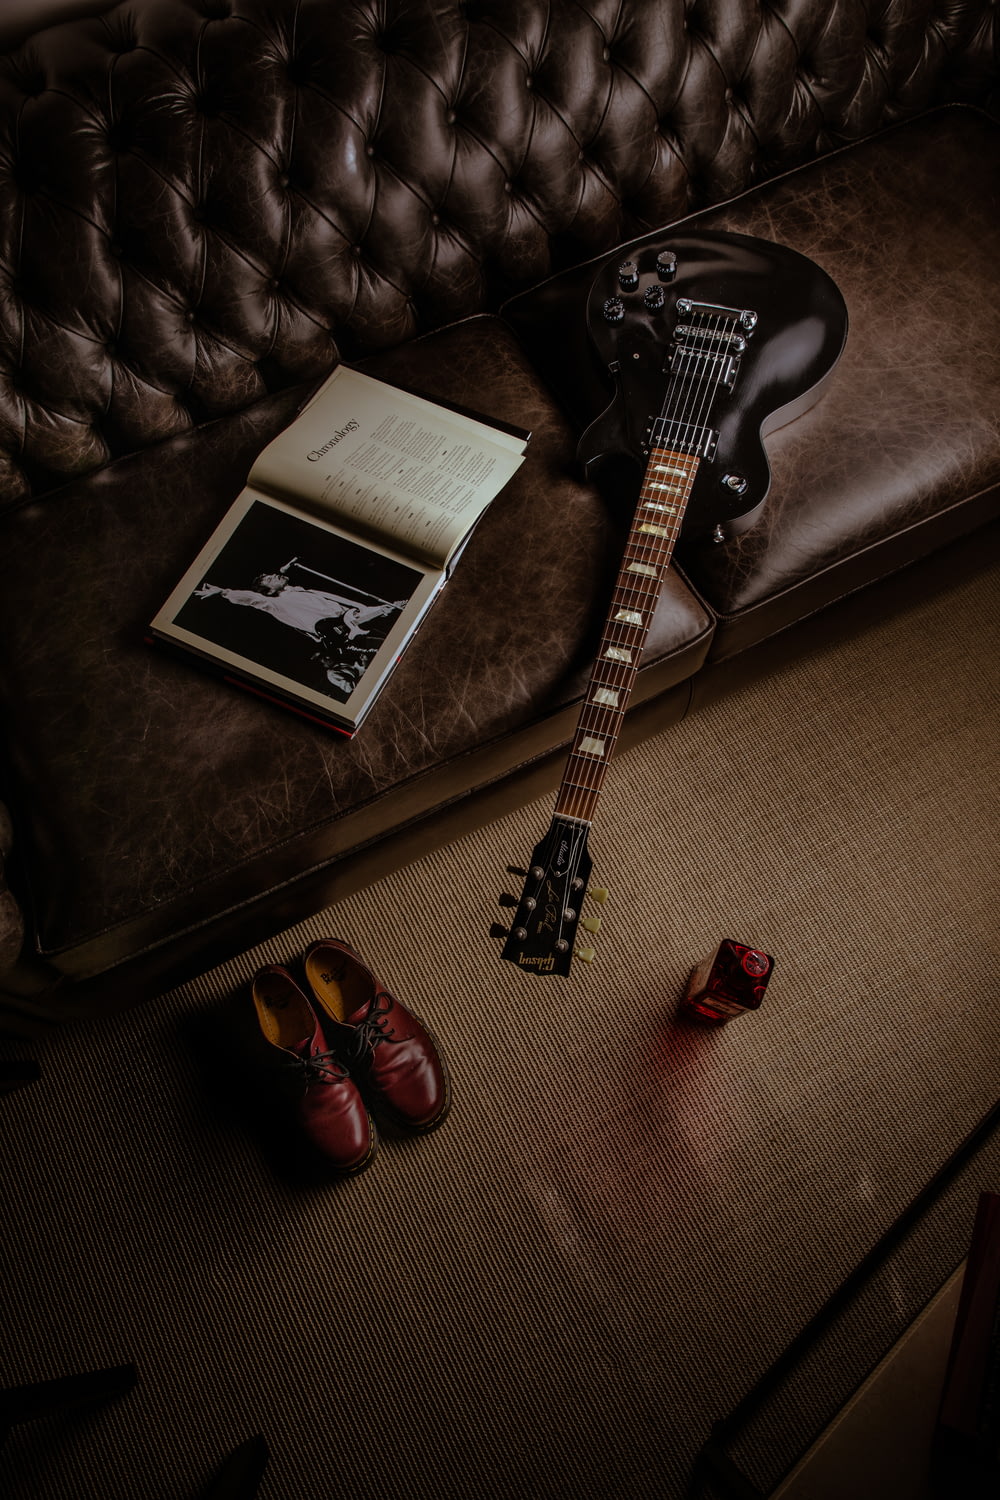 black and white stratocaster electric guitar beside black and white book